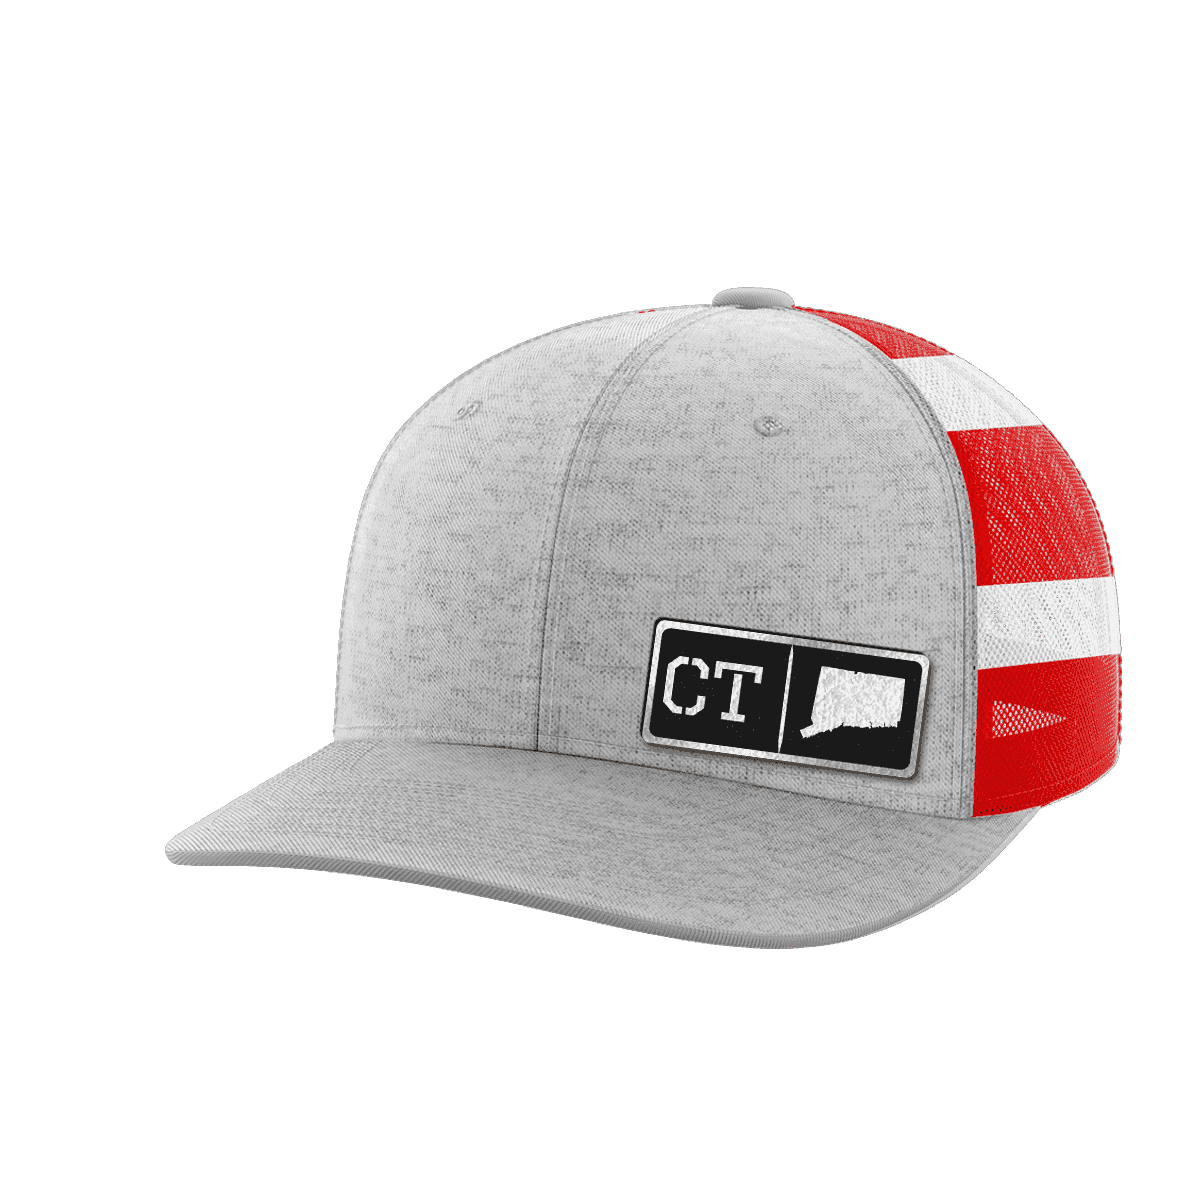 Connecticut Homegrown Hats - Greater Half